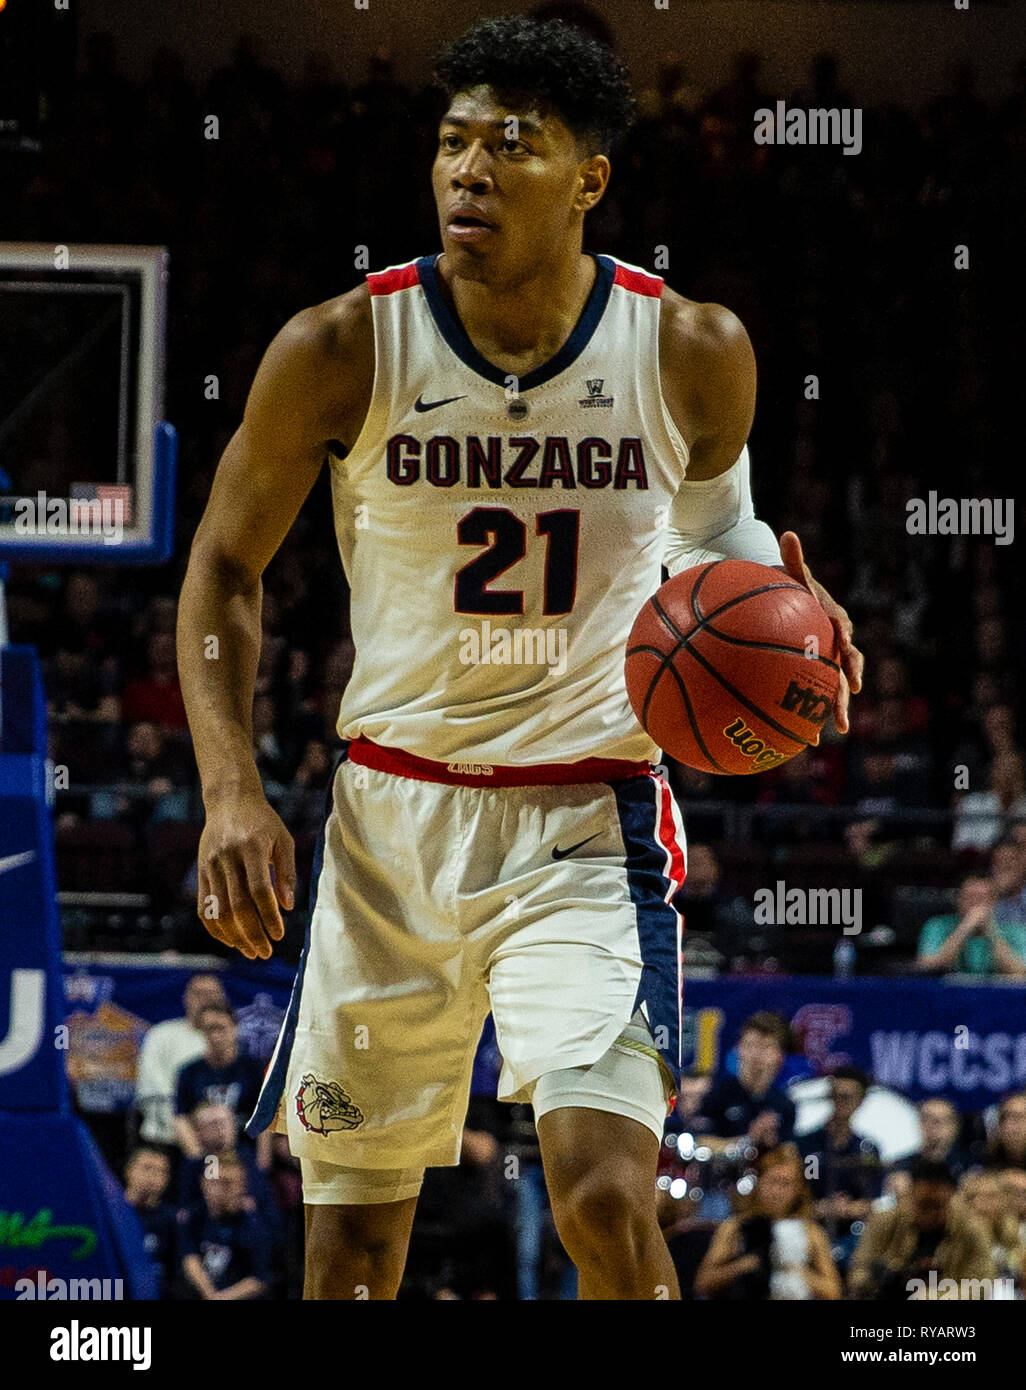 Mar 12 2019 Las Vegas, NV, U.S.A. Gonzaga forward Rui Hachimura (21) looks to pass the ball during the NCAA West Coast Conference Men's Basketball Tournament championship between the Gonzaga Bulldogs and the Saint Mary's Gaels 47-60 lost at Orleans Arena Las Vegas, NV. Thurman James/CSM Stock Photo